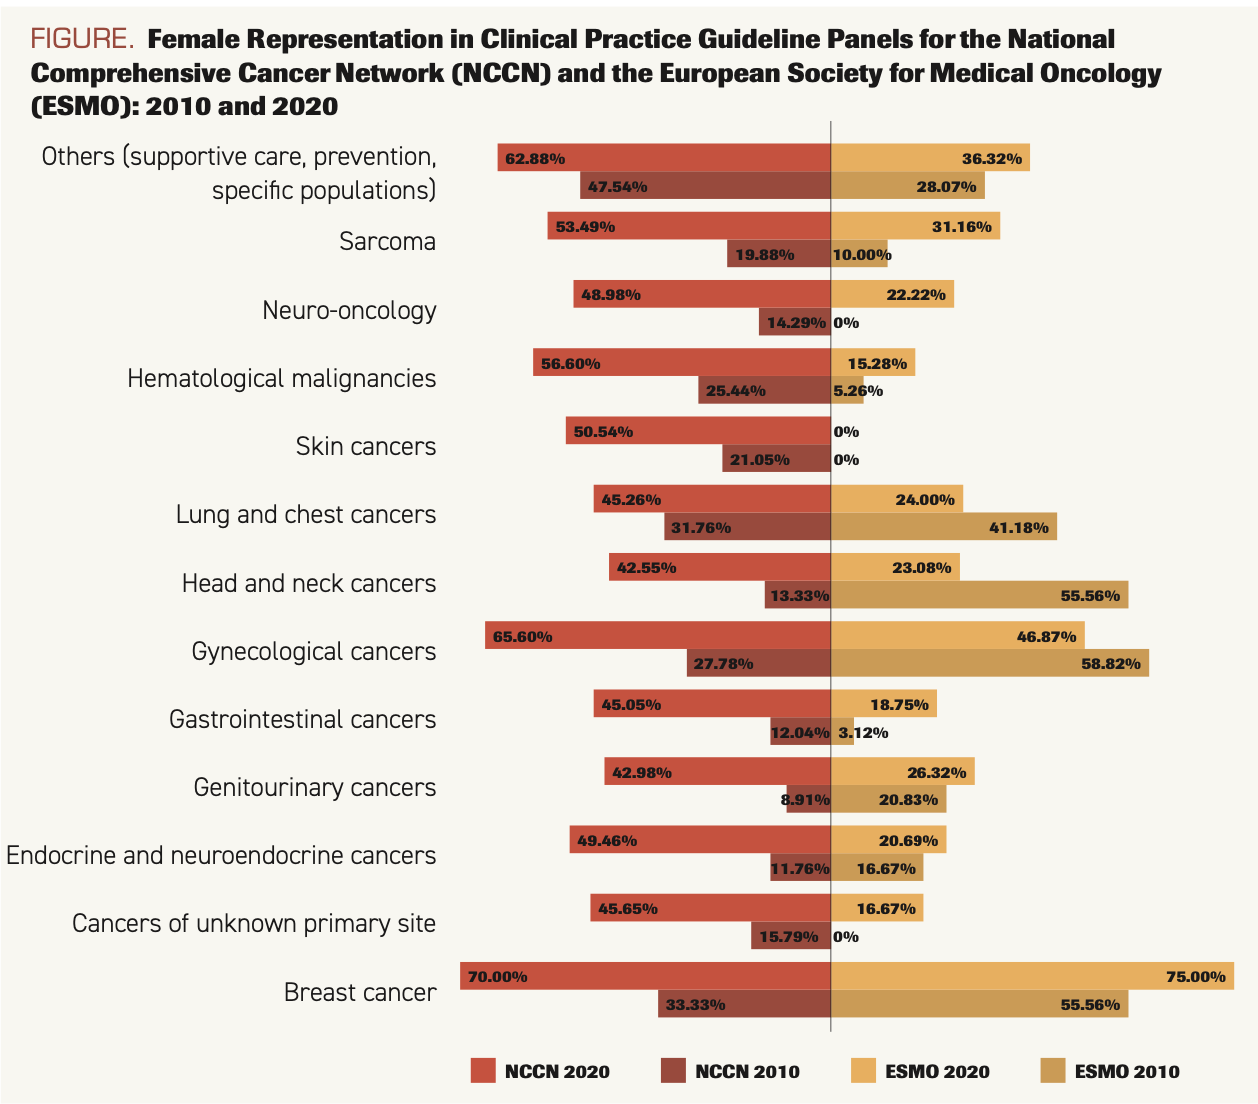 FIGURE. Female Representation in Clinical Practice Guideline Panels for the National Comprehensive Cancer Network (NCCN) and the European Society for Medical Oncology (ESMO): 2010 and 2020